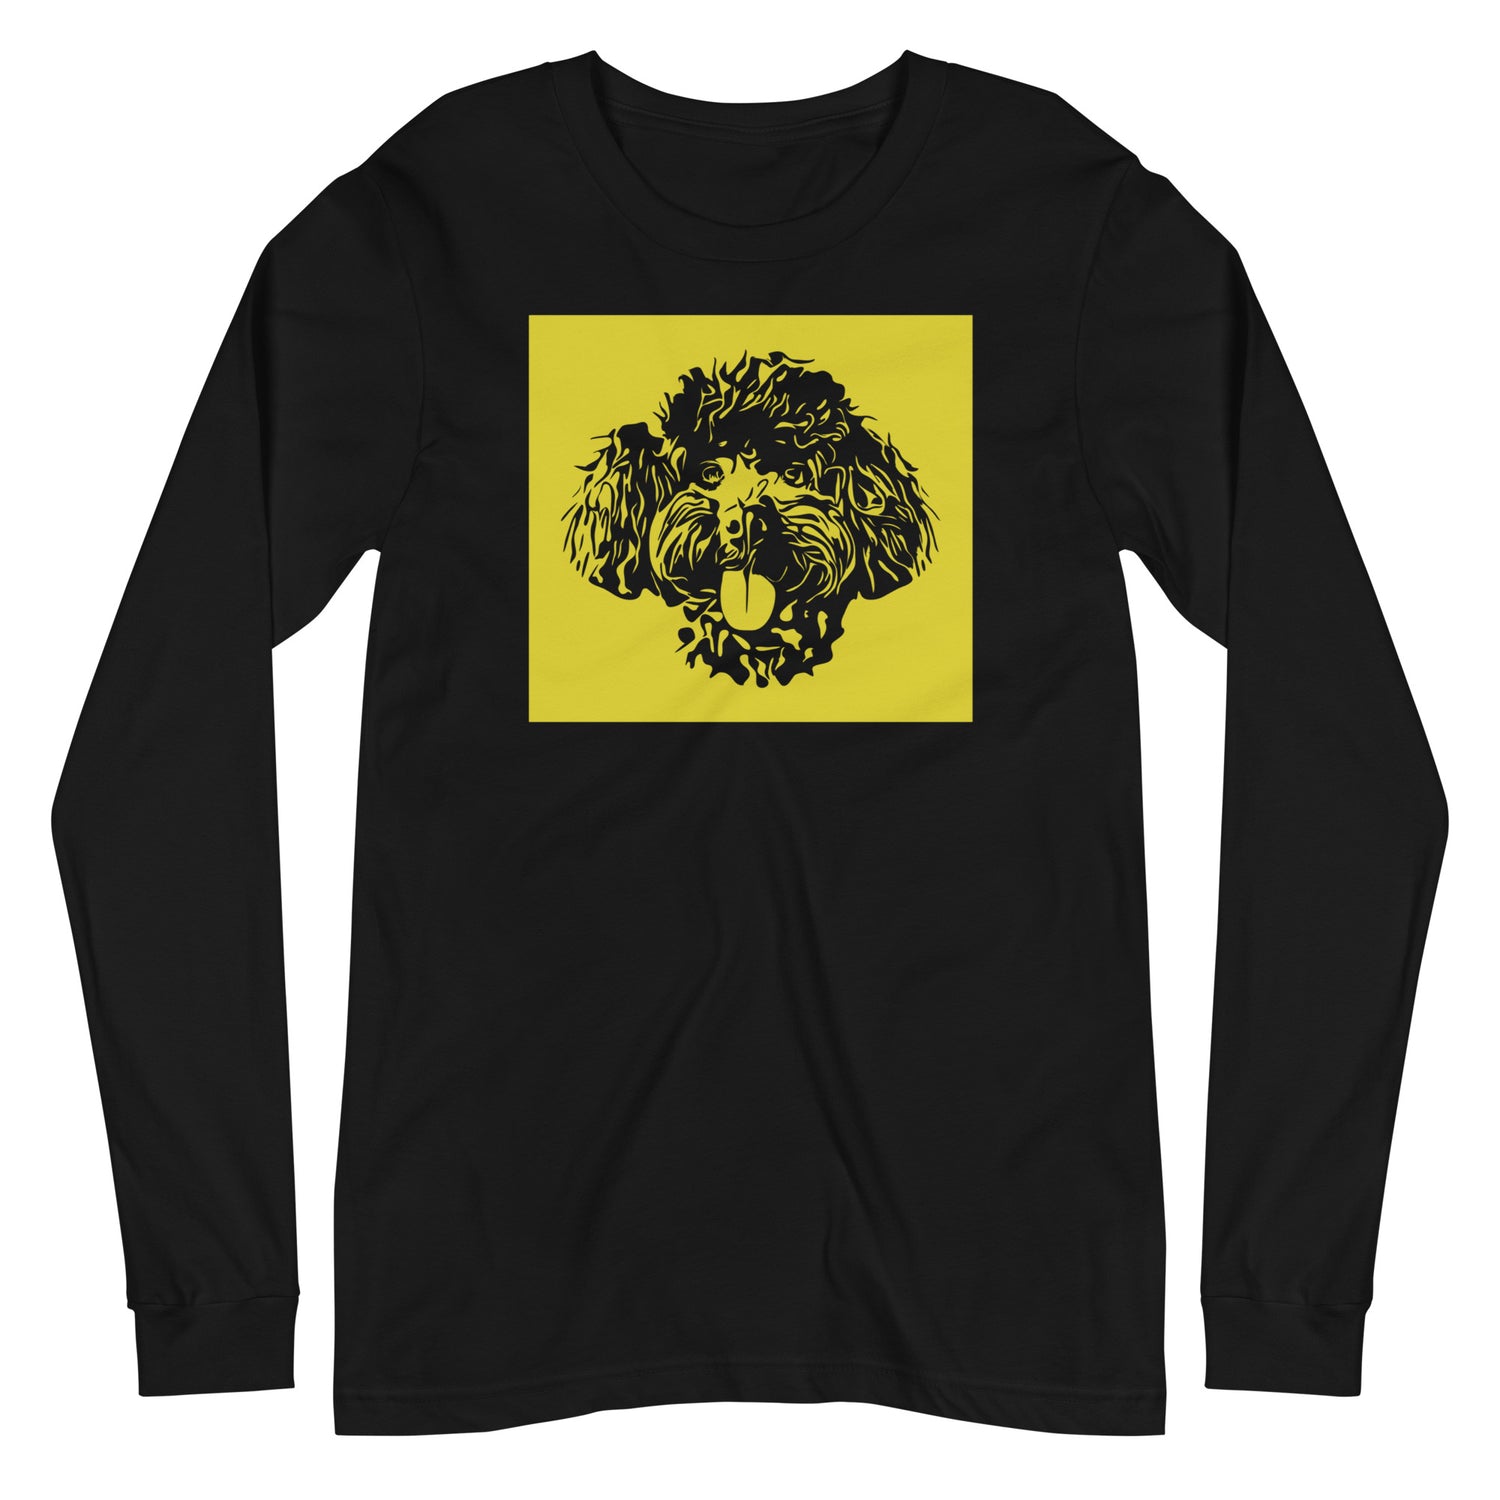 Toy Poodle face silhouette with yellow background square on unisex black long sleeve t-shirt